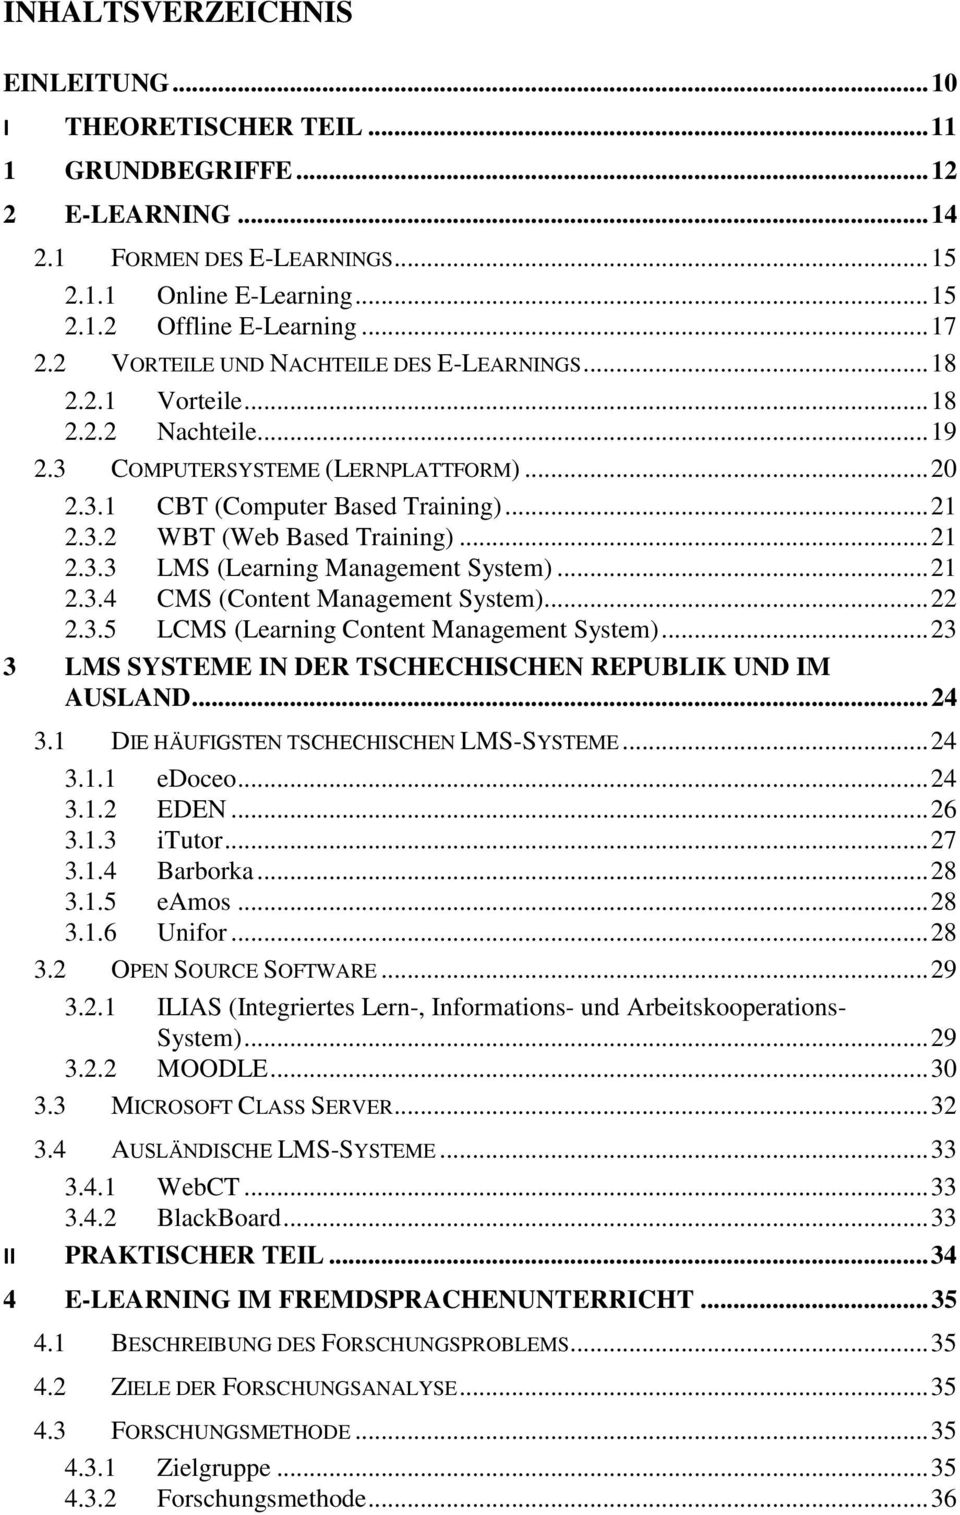 .. 21 2.3.3 LMS (Learning Management System)... 21 2.3.4 CMS (Content Management System)... 22 2.3.5 LCMS (Learning Content Management System).